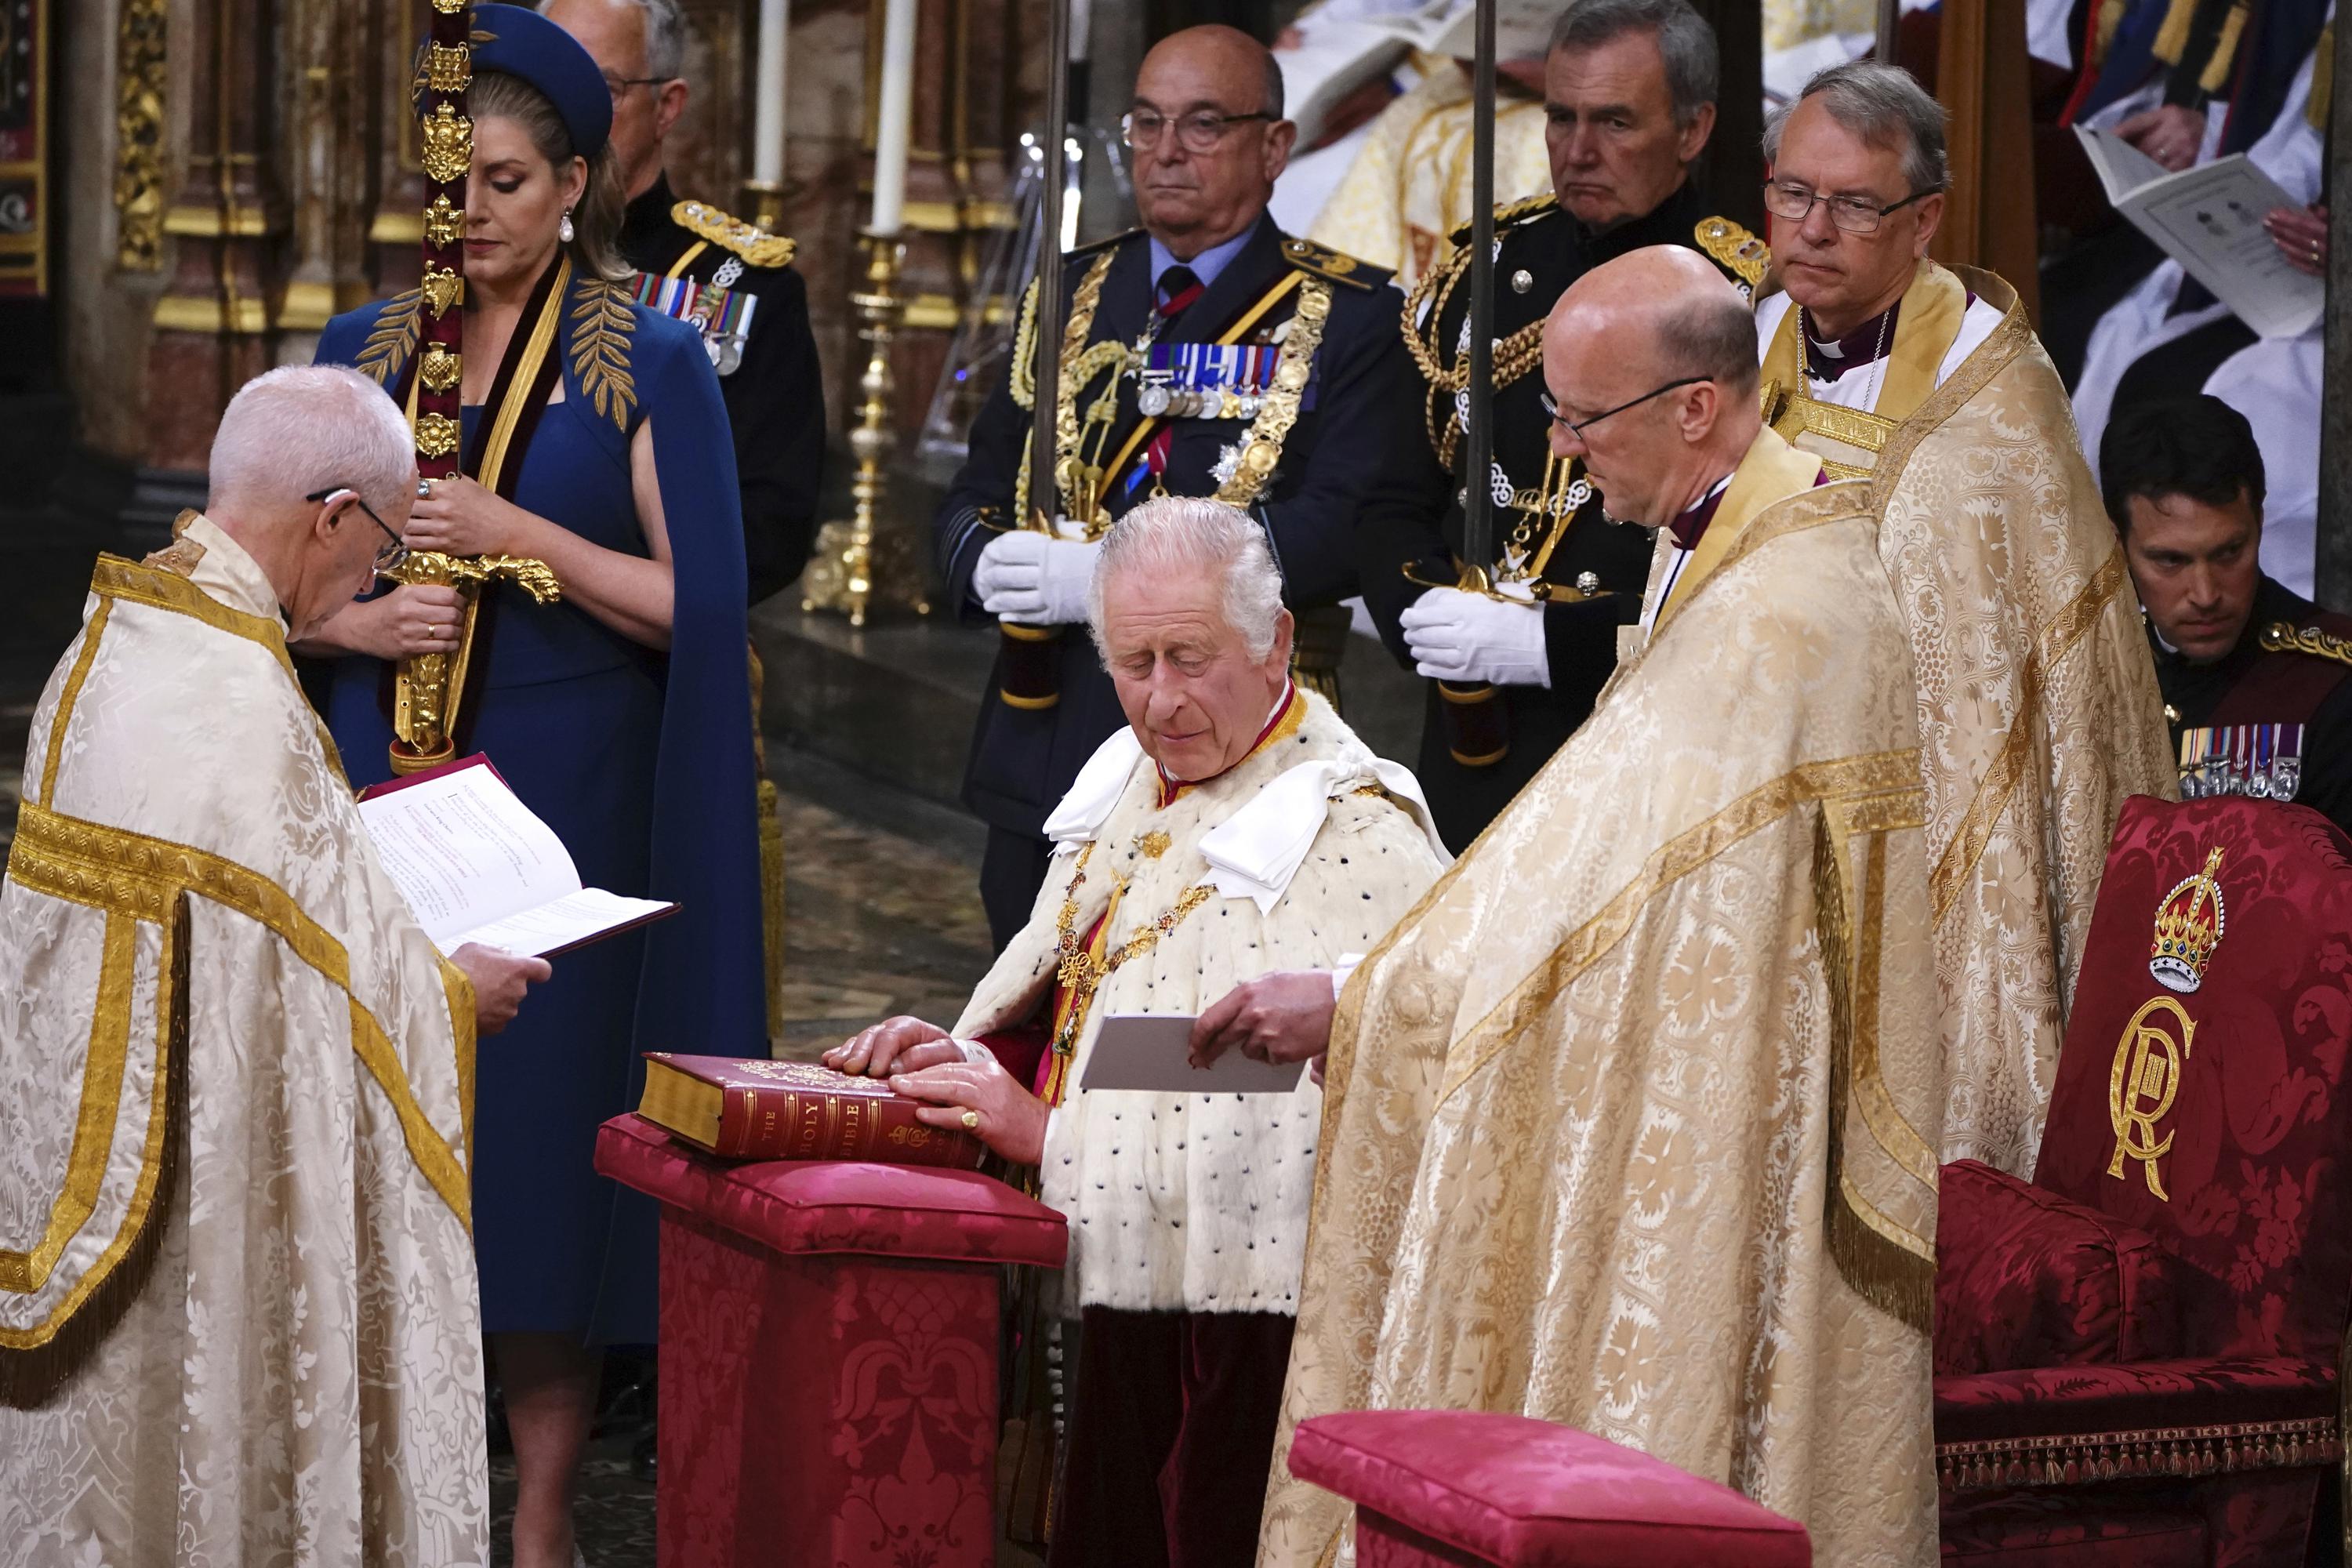 King Charles III crowned in ancient rite at uncertain moment